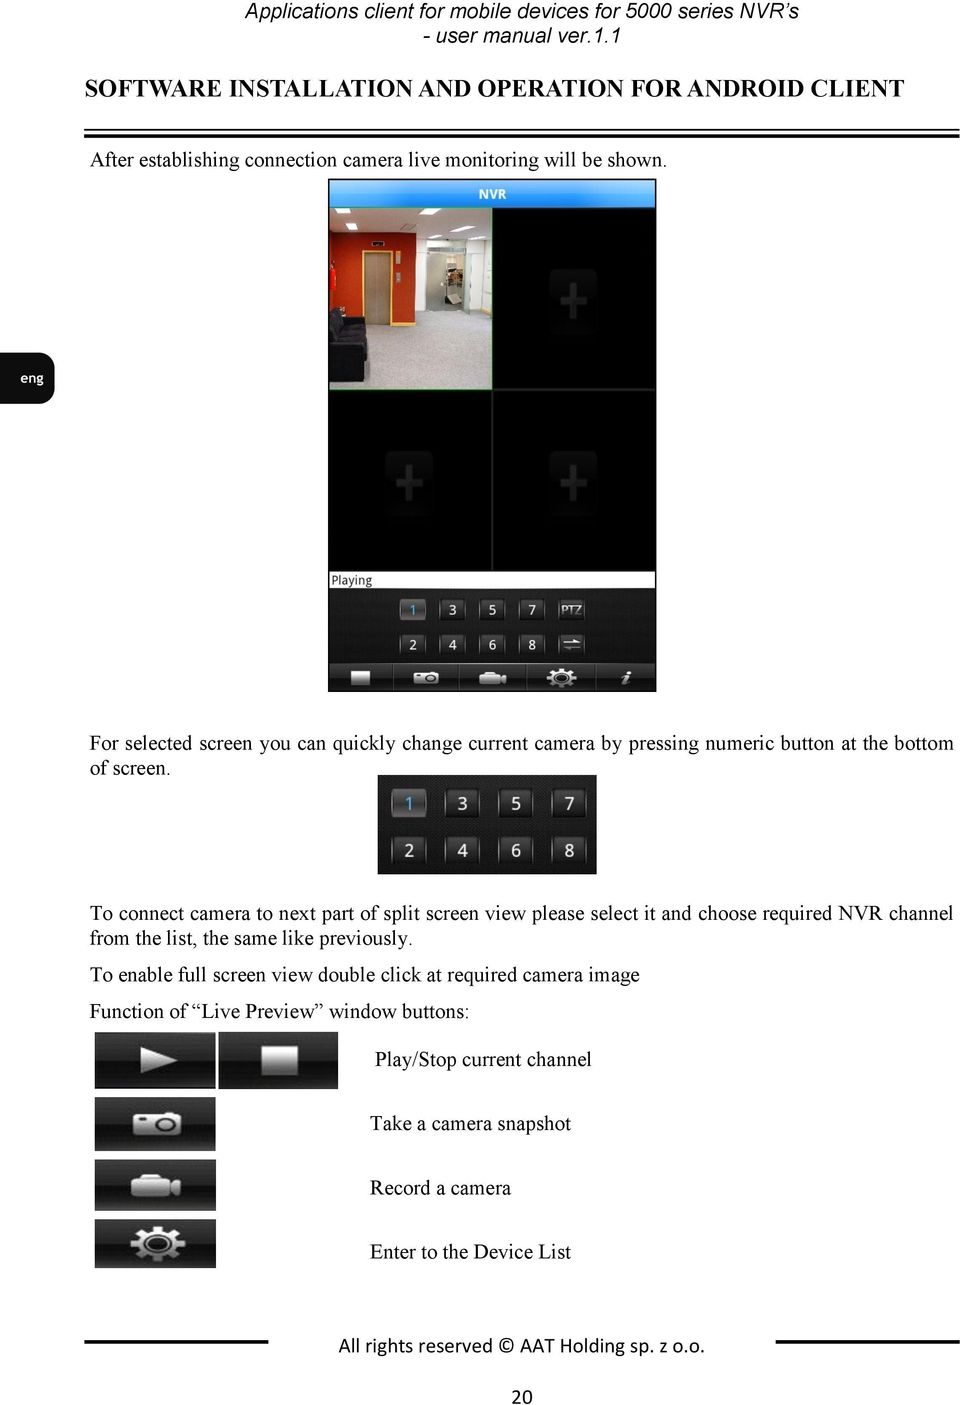 For selected screen you can quickly change current camera by pressing numeric button at the bottom of screen.